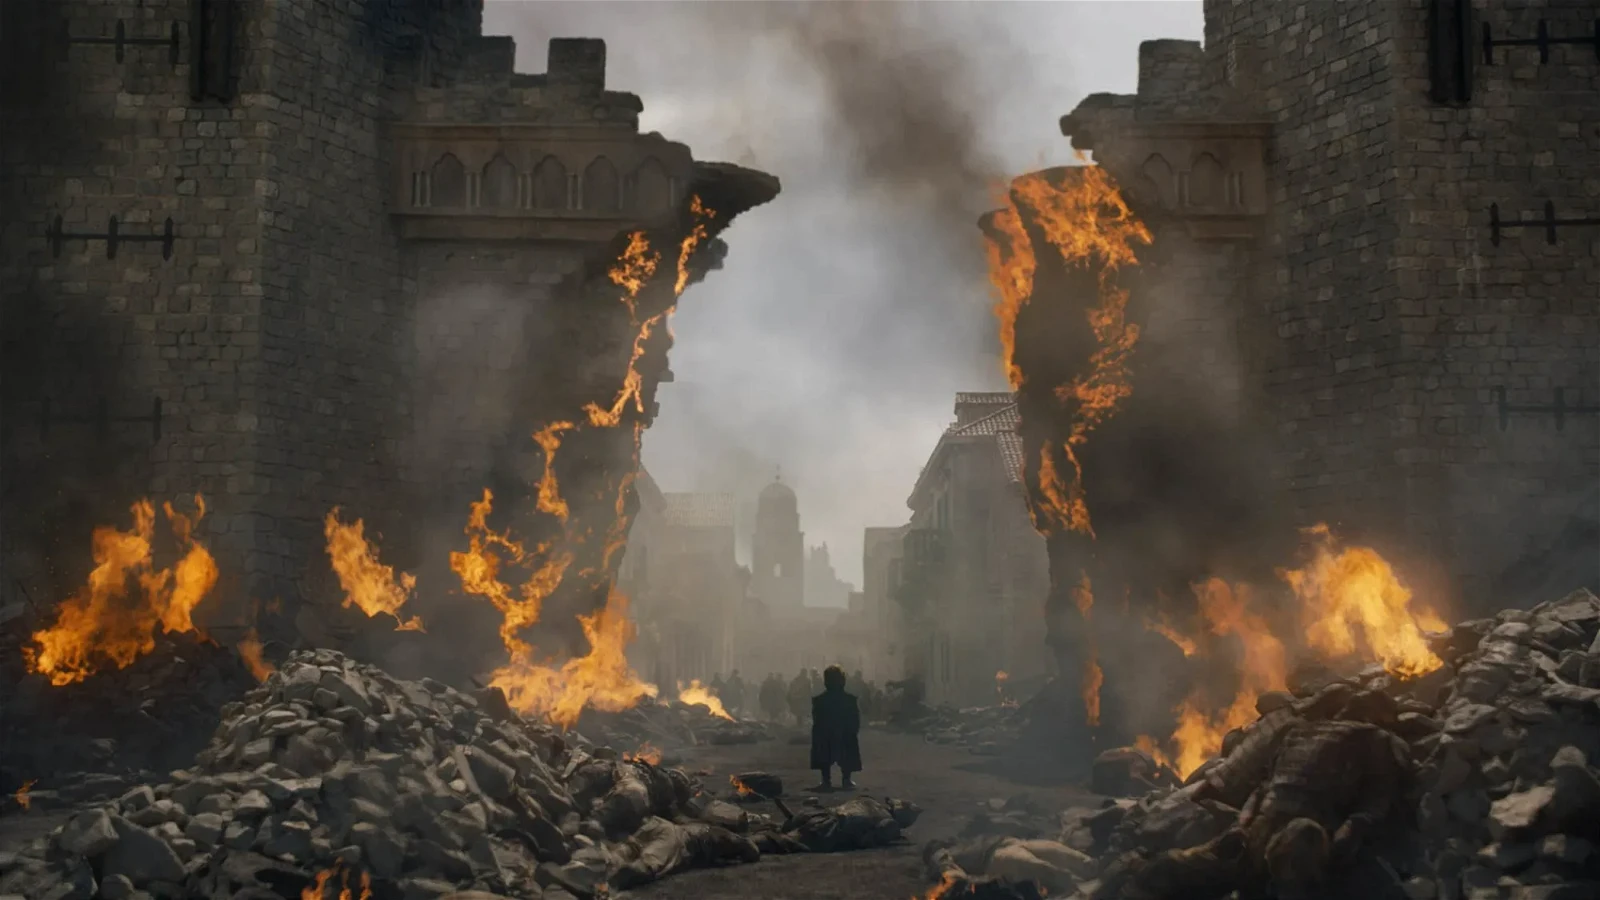 The King's Landing massacre at the end of Game of Thrones 